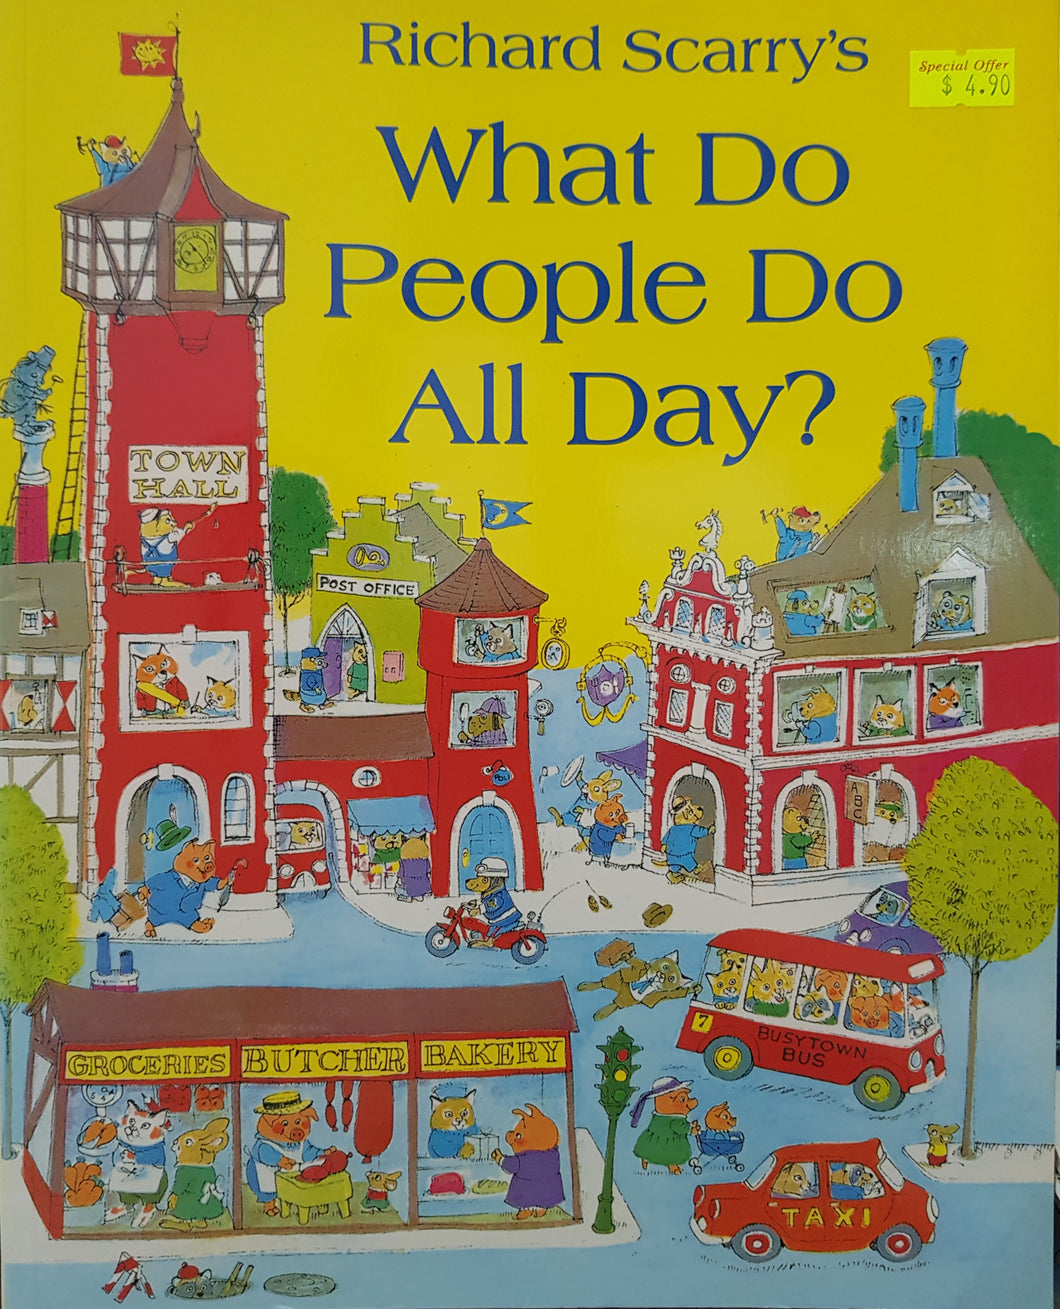 What Do People Do All Day? - Richard Scarry's